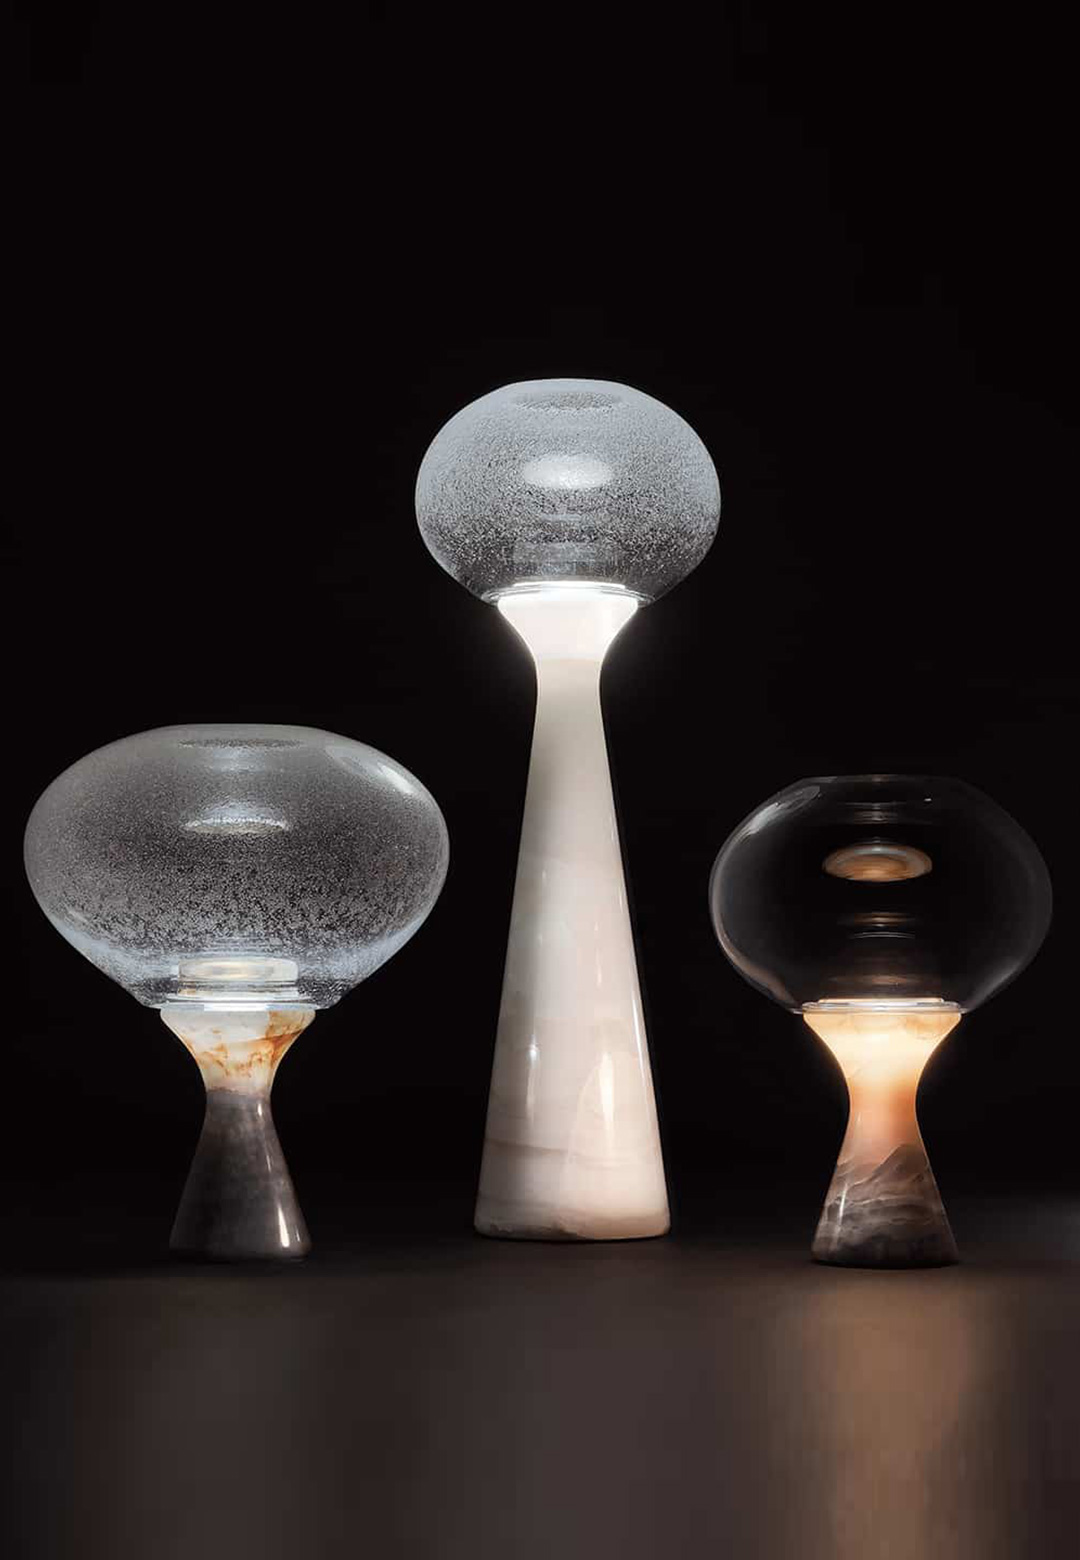 Enzo Bert experiments with onyx, Murano glass and light for Aurora collection